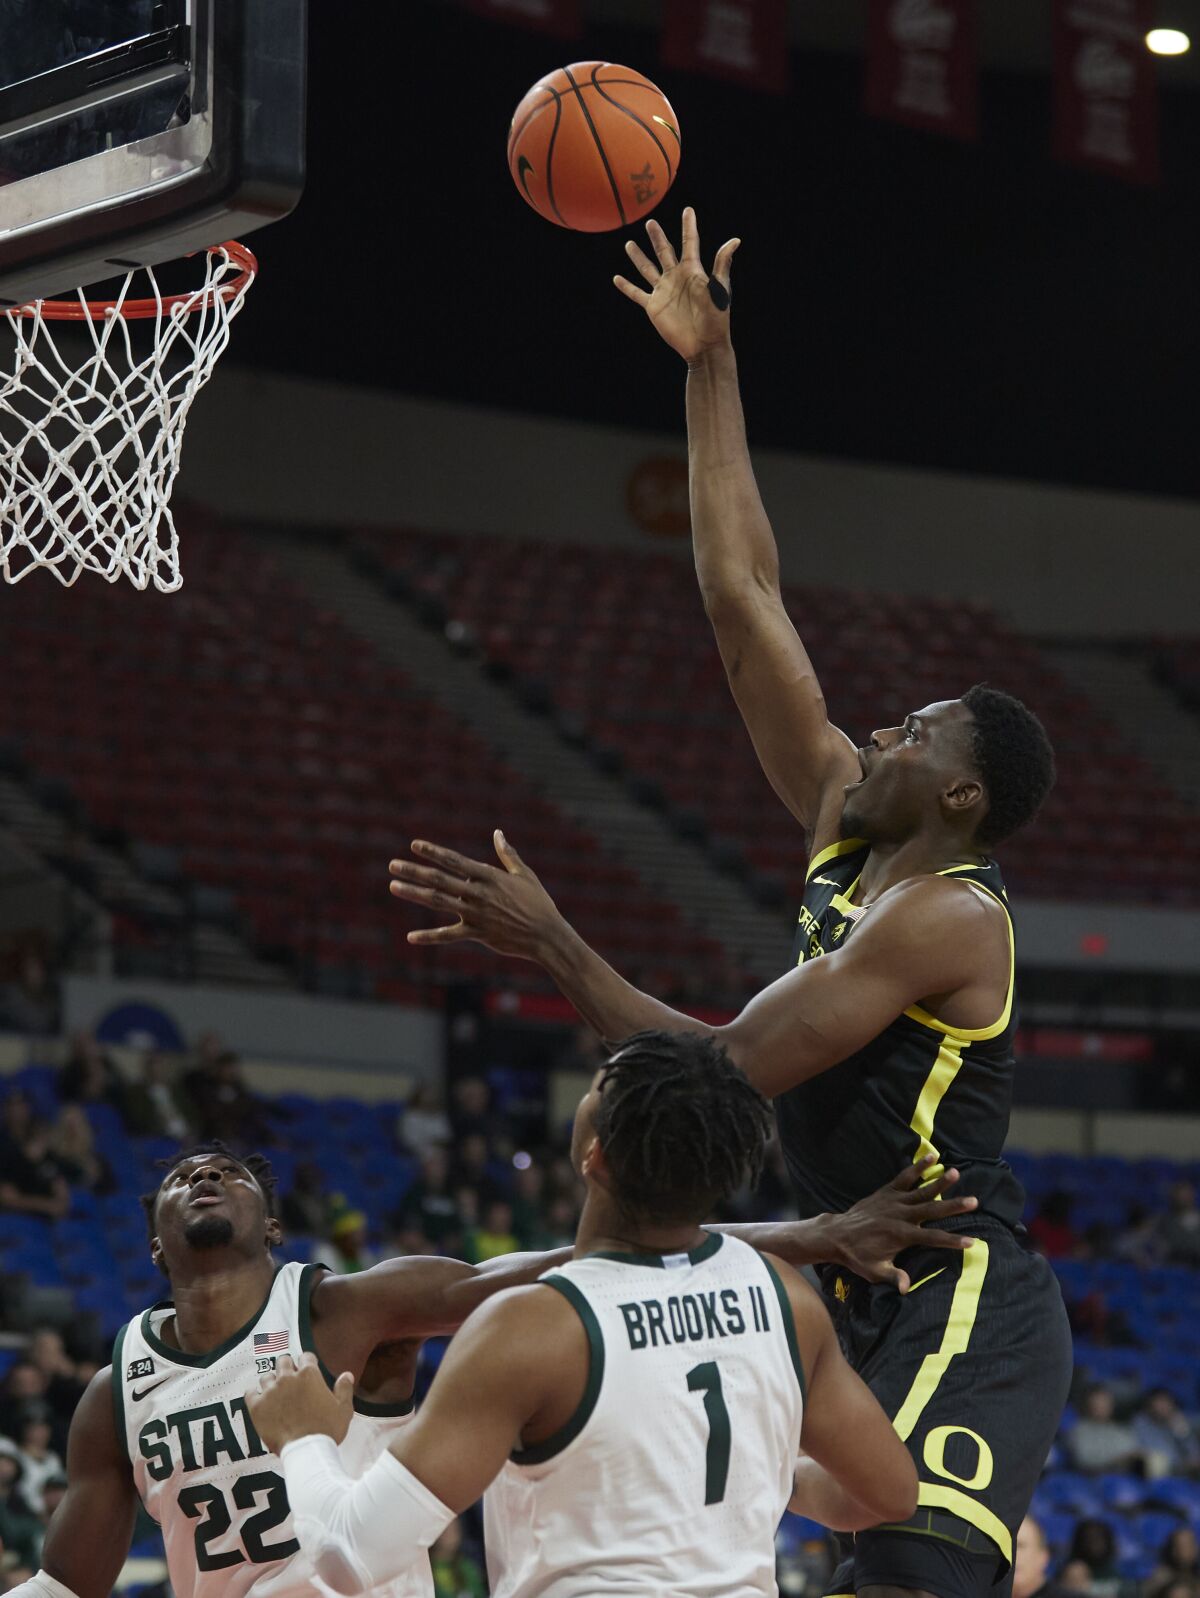 Oregon center N'Faly Dante, right, shoots over Michigan State guard Pierre Brooks (1) and center Mady Sissoko (22) during the first half of an NCAA college basketball game in the Phil Knight Invitational tournament in Portland, Ore., Friday, Nov. 25, 2022. (AP Photo/Craig Mitchelldyer)